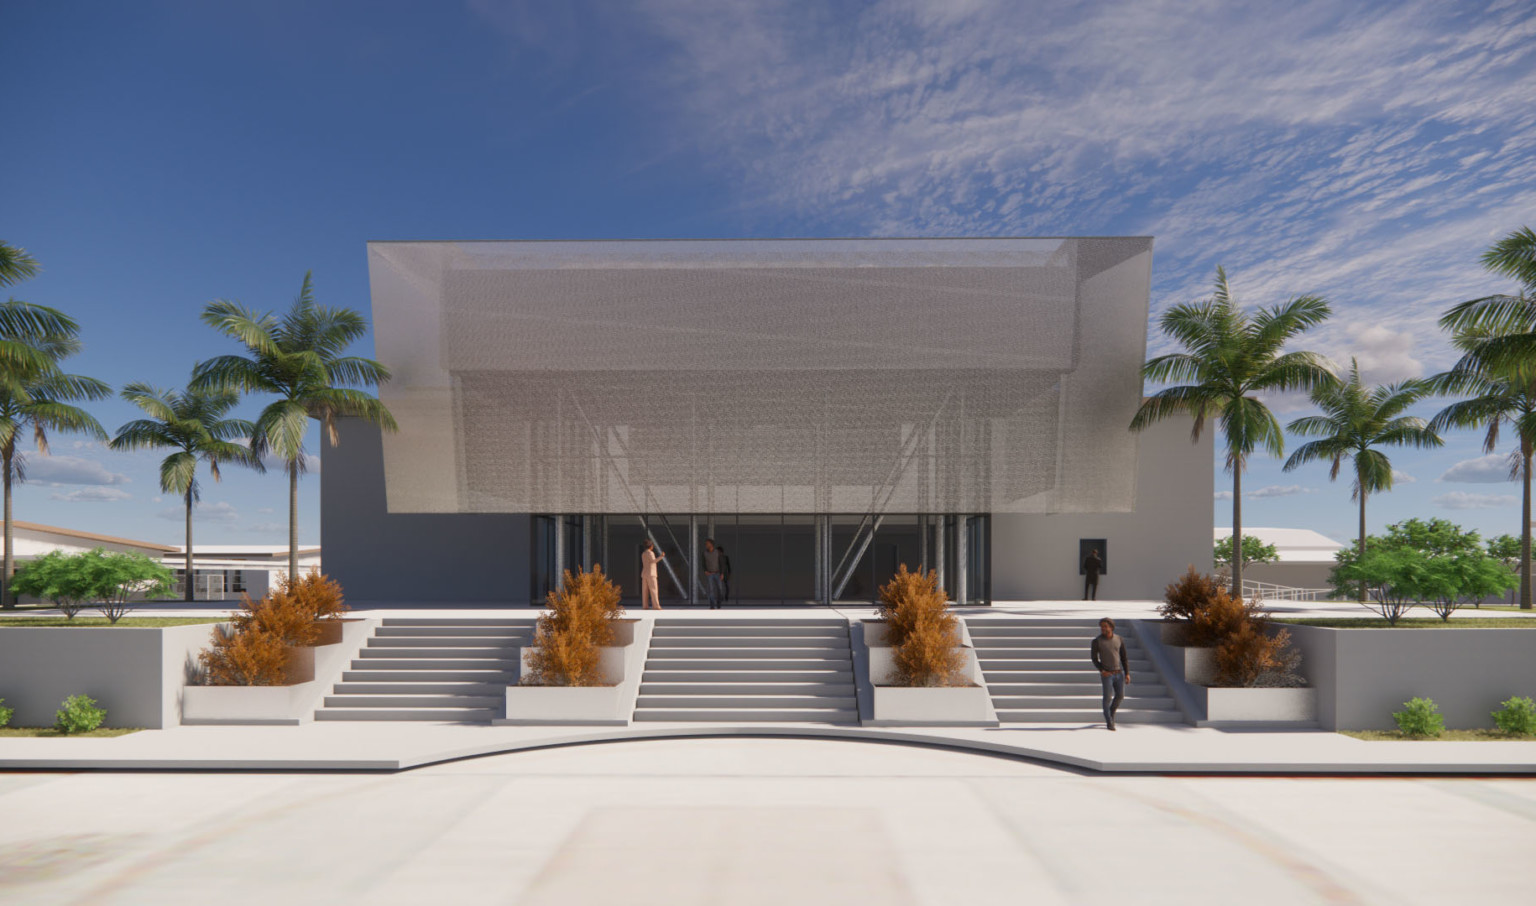 rendering of a symmetrical gray building with a metallic transparent volume at the top of stairs and concrete planters